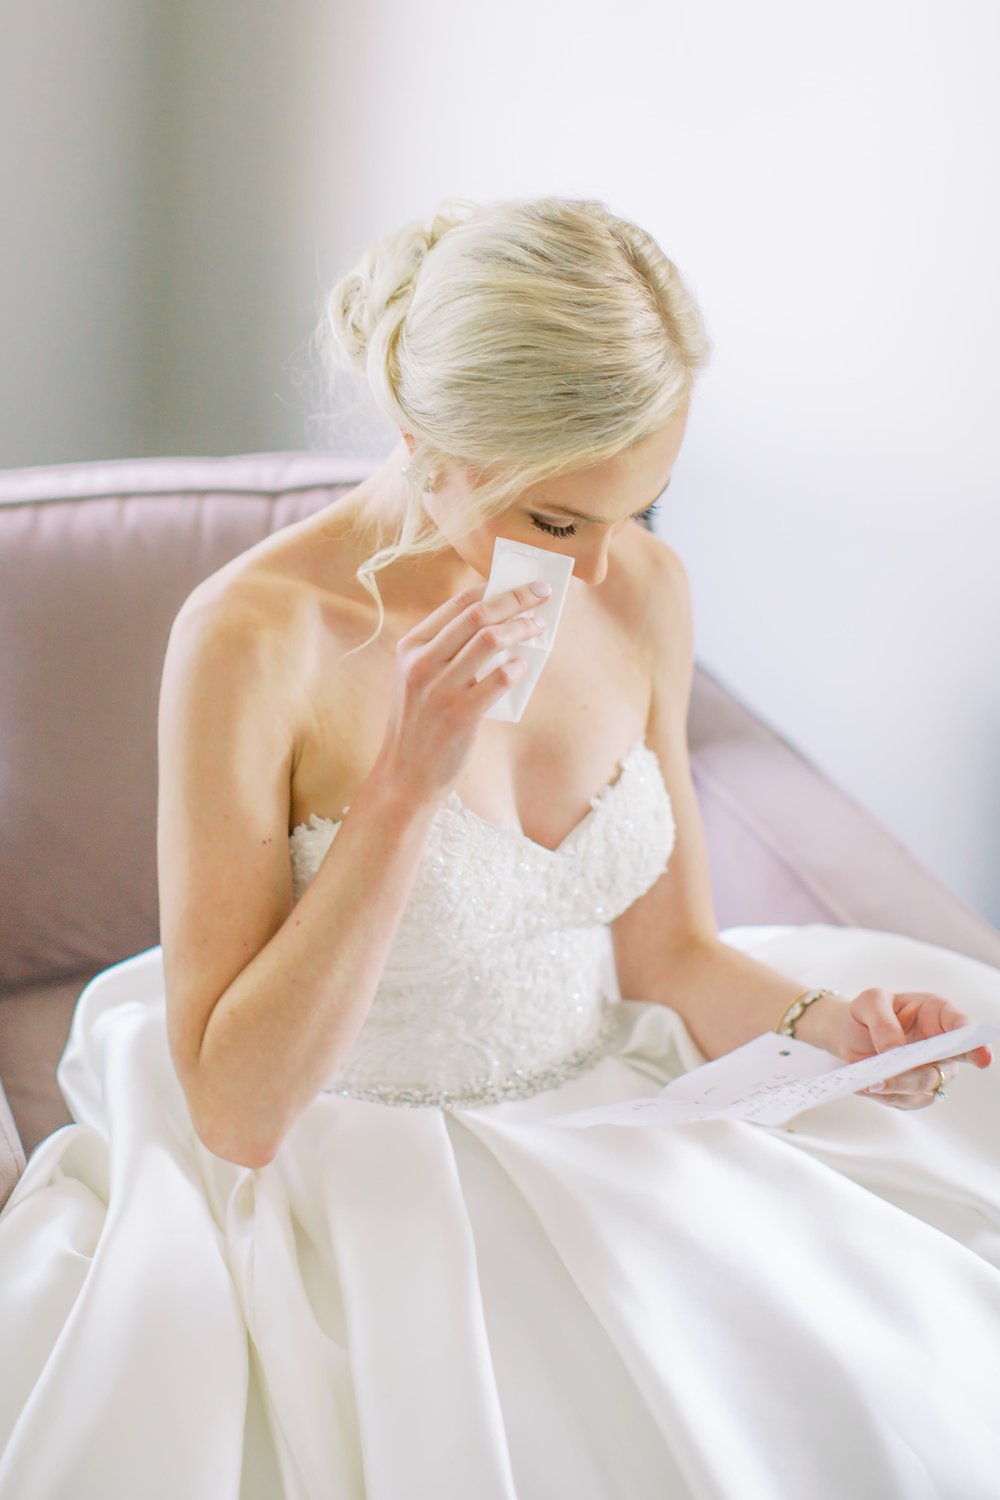 Bride cries reading letter from groom